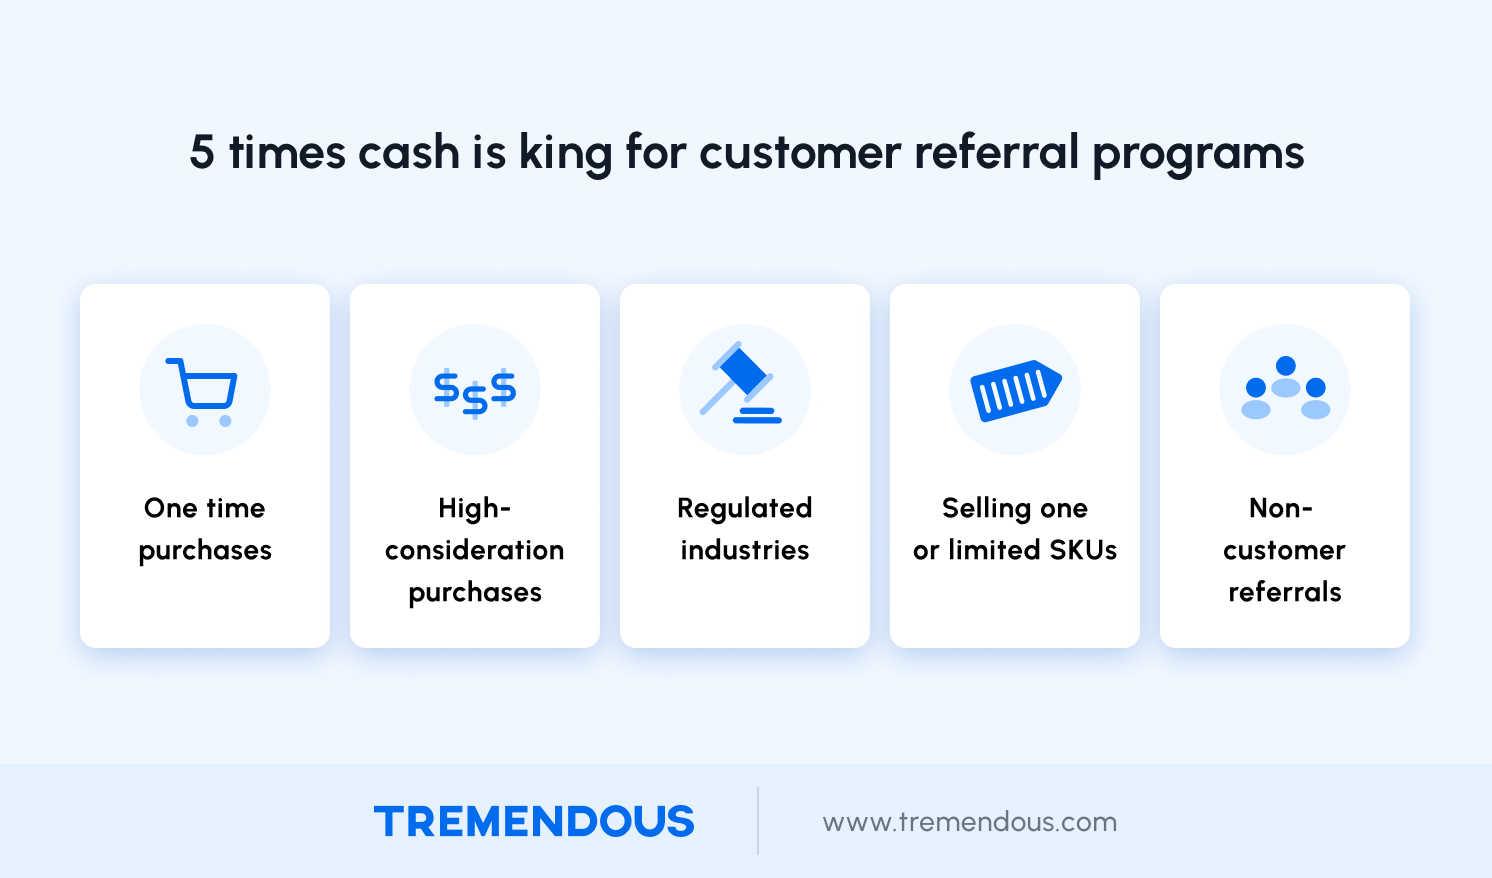 5 times cash is king for customer referral programs